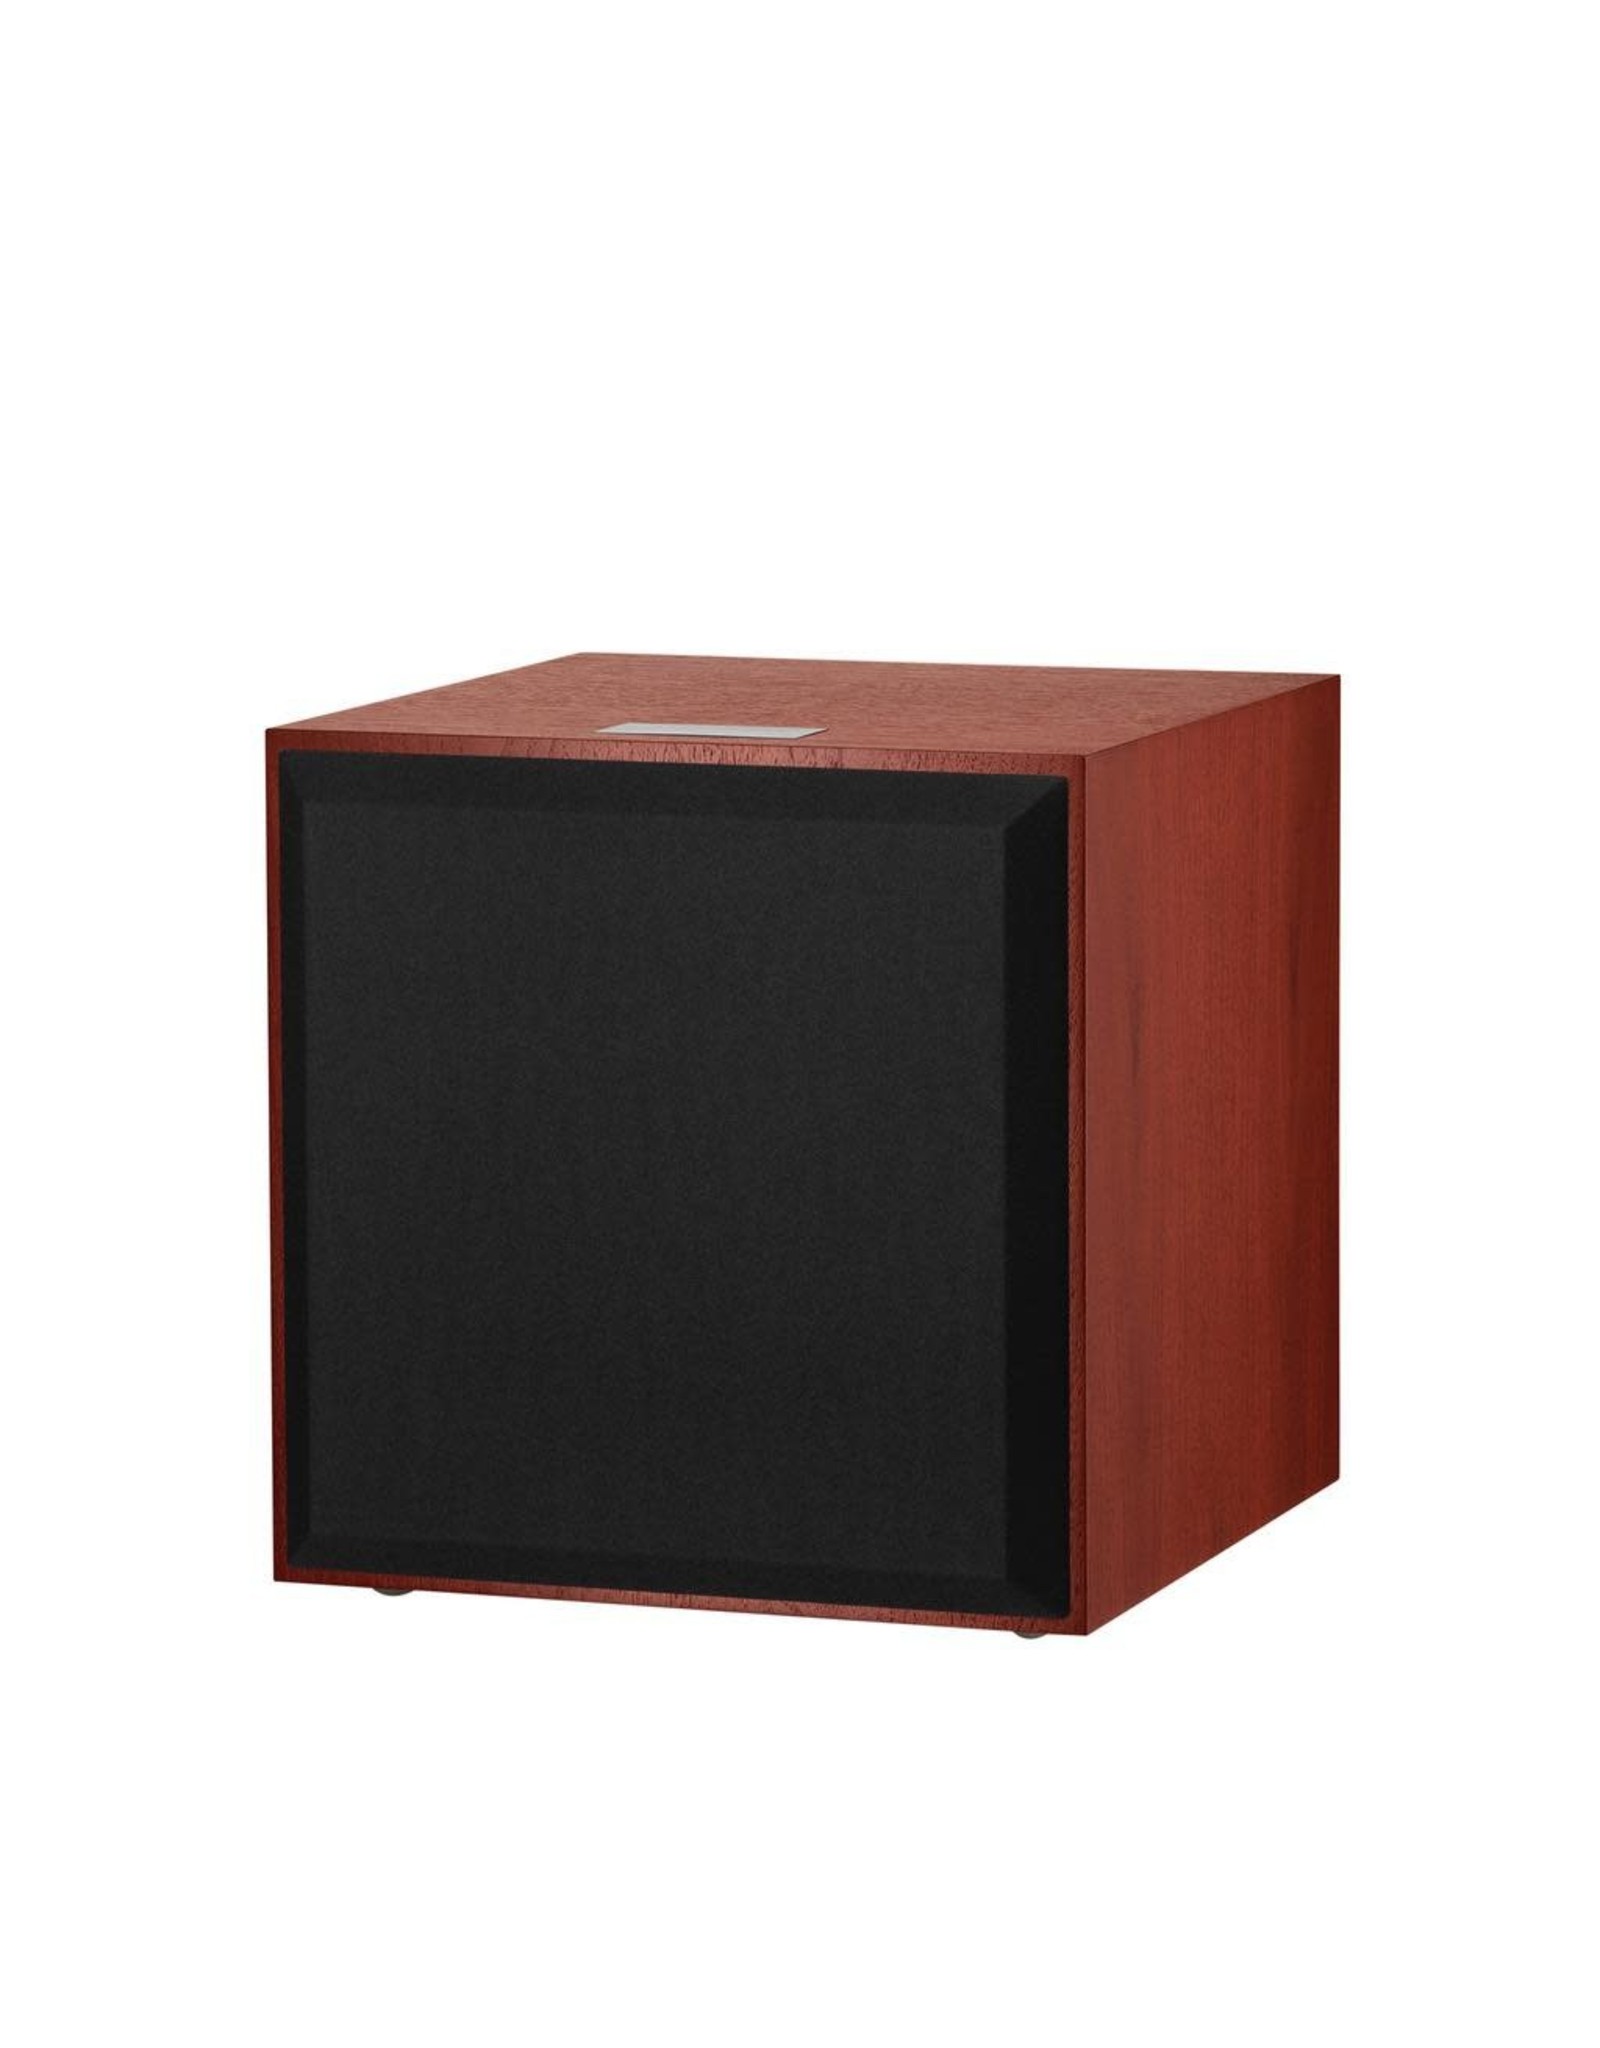 BOWERS & WILKINS B&W DB4S 10” 1KW Active Subwoofer